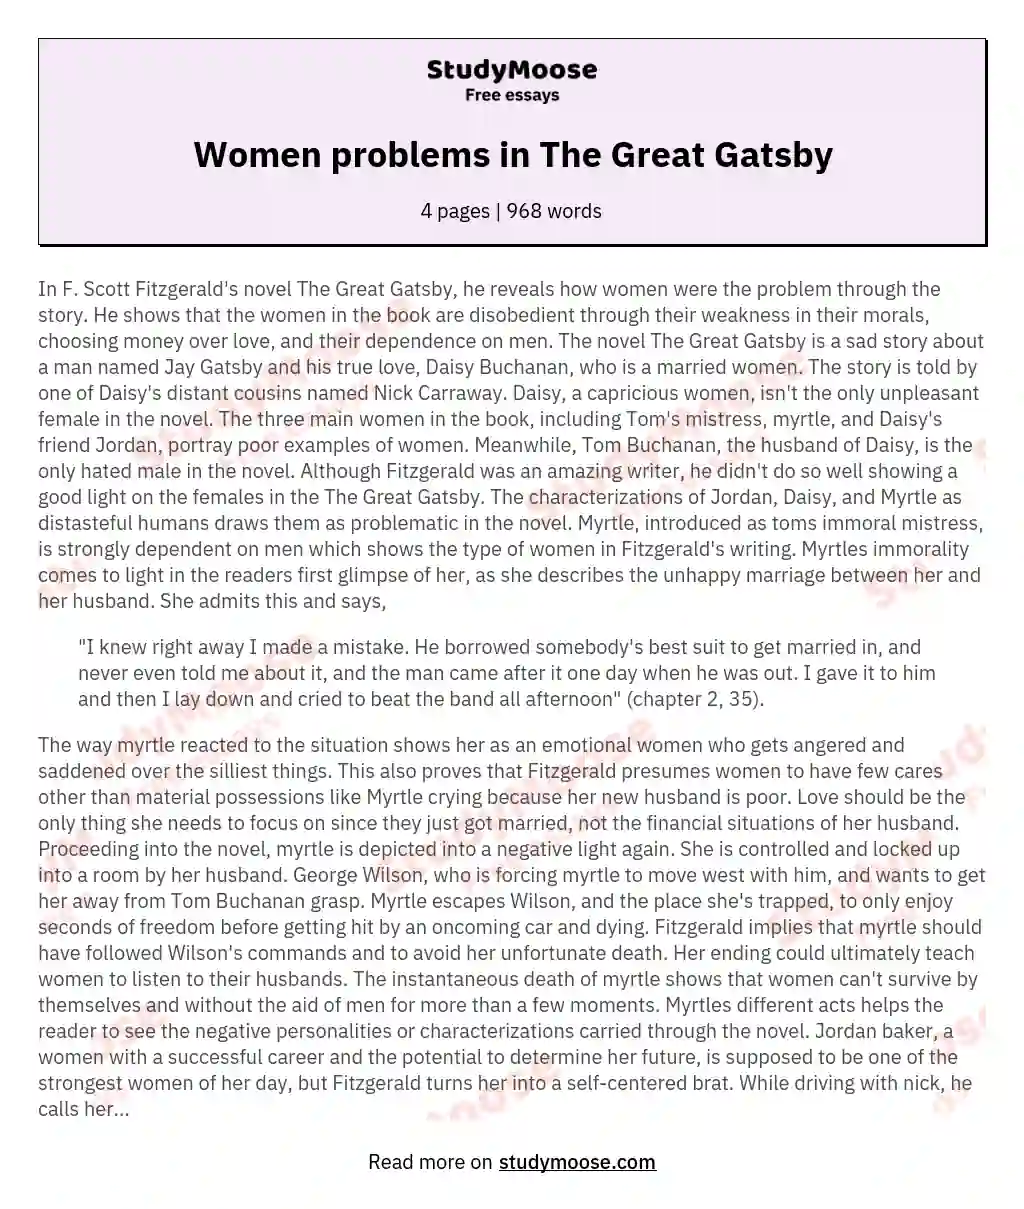 Women problems in The Great Gatsby